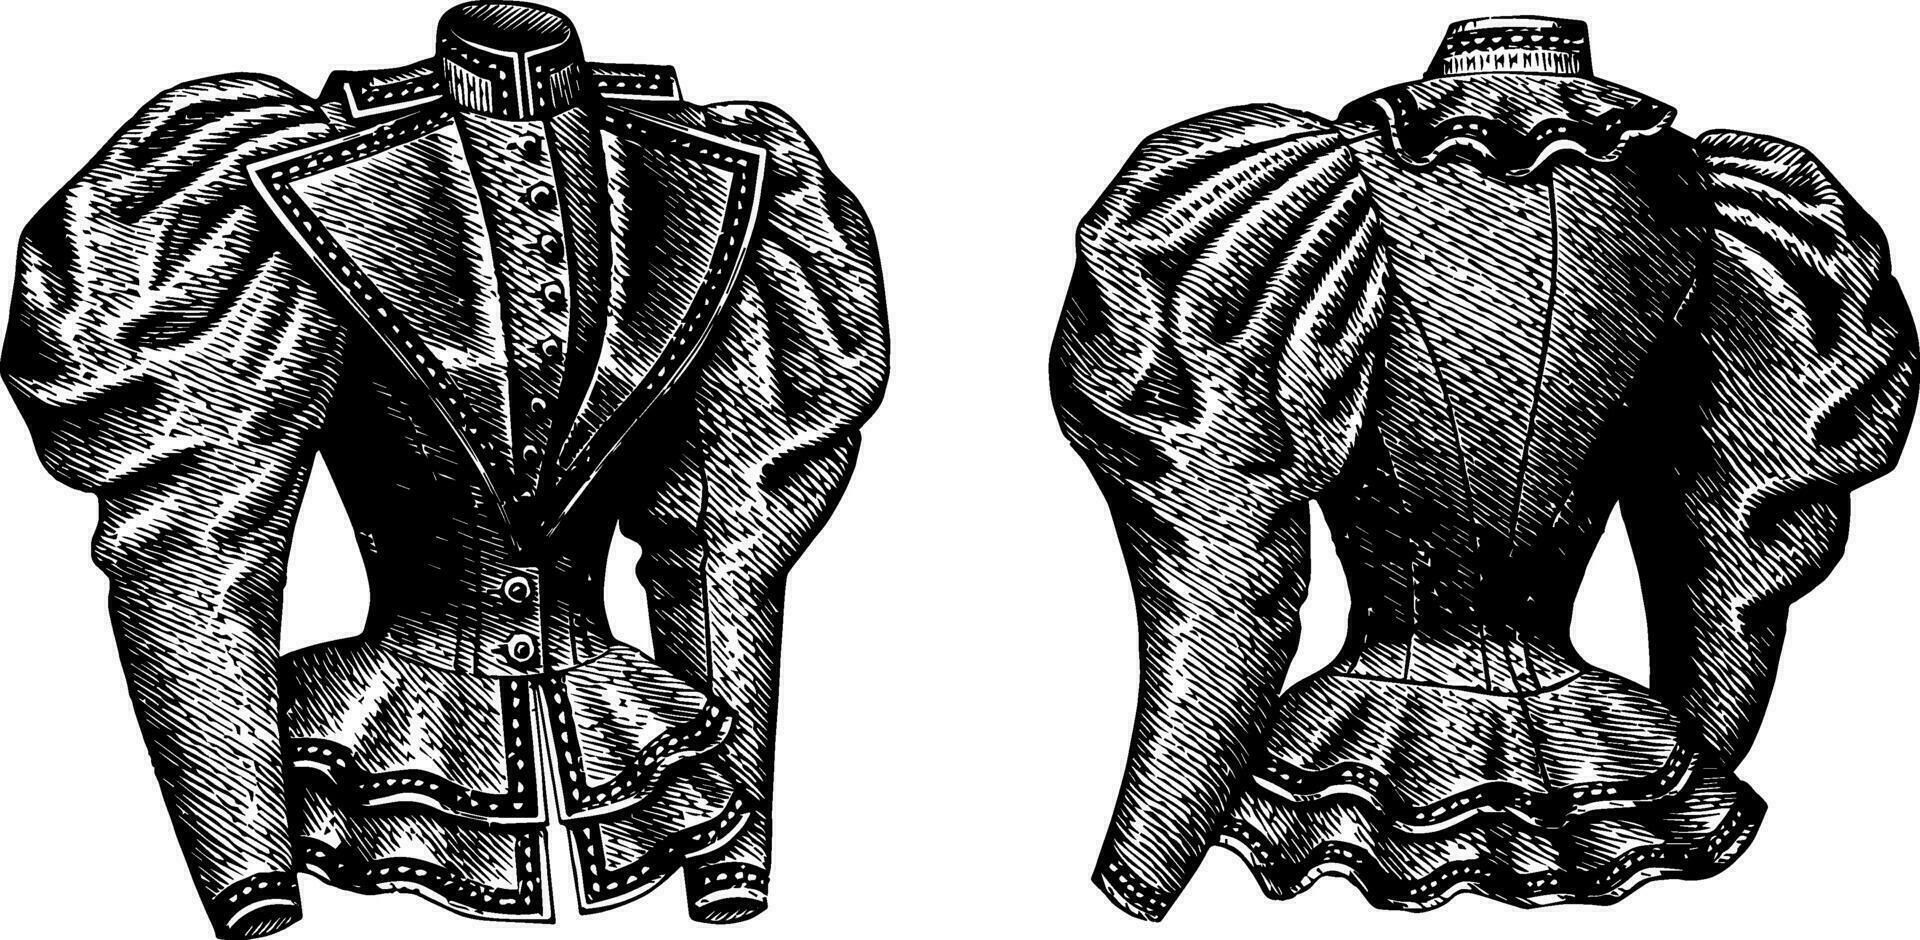 Fitted Jacket, puffed sleeves, vintage engraving. vector